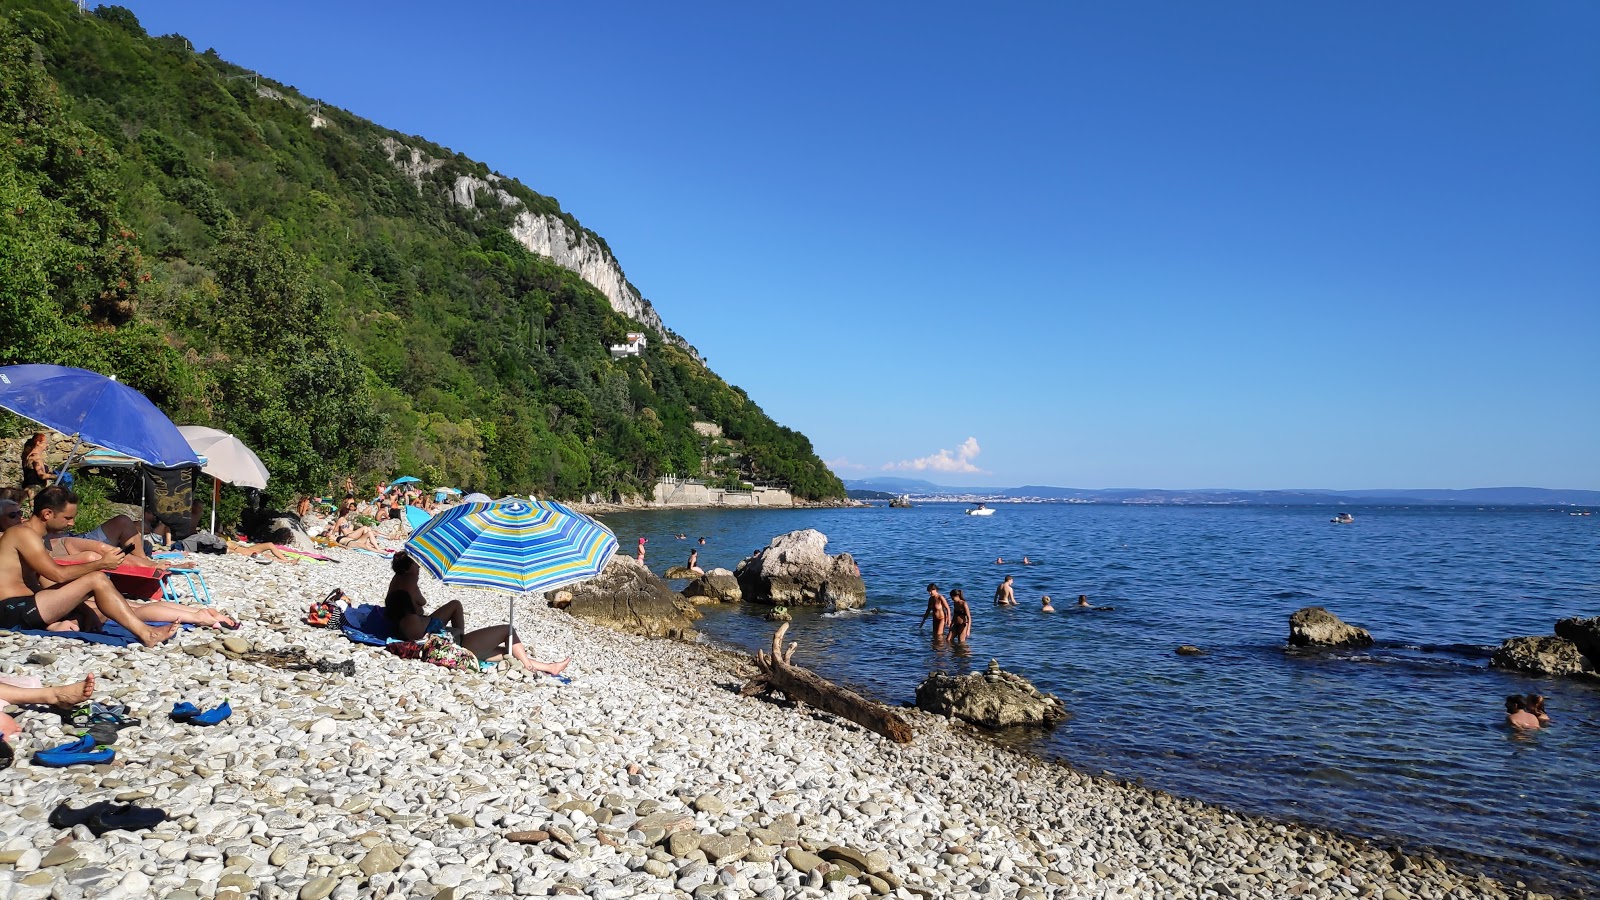 Photo of Spiaggia Liburnia with rocks cover surface